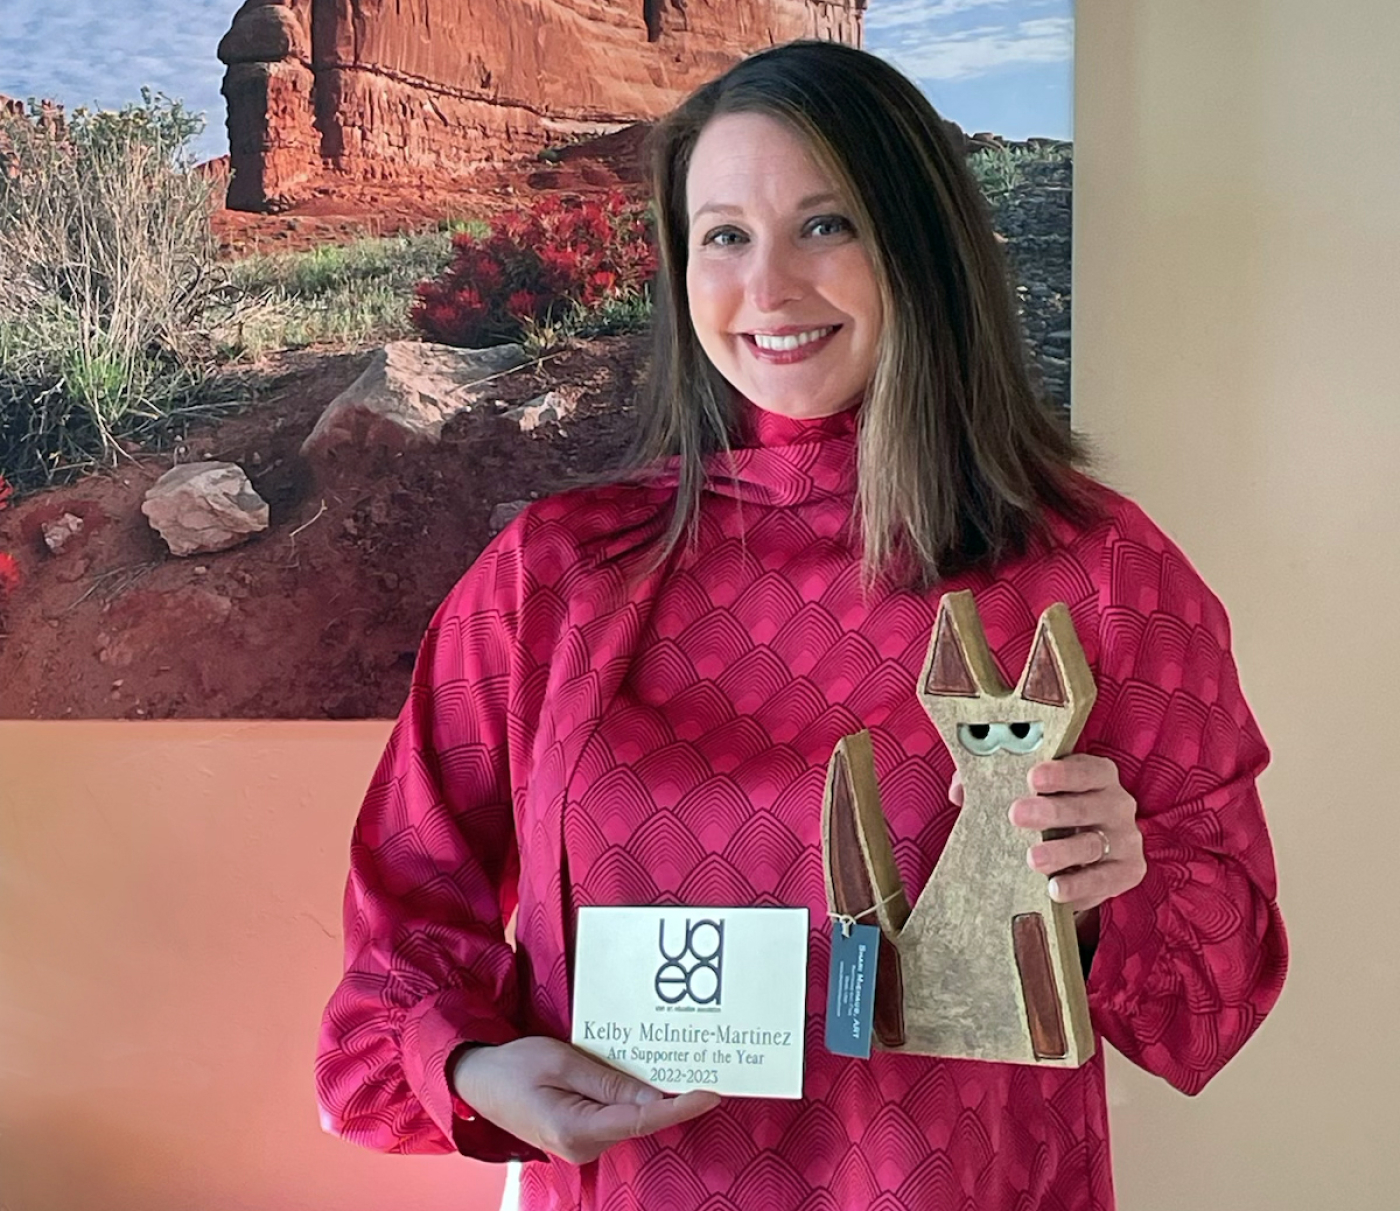 Associate Dean Kelby McIntyre-Martinez with her UAEA award (made by local Moab artist Shari Michaud)